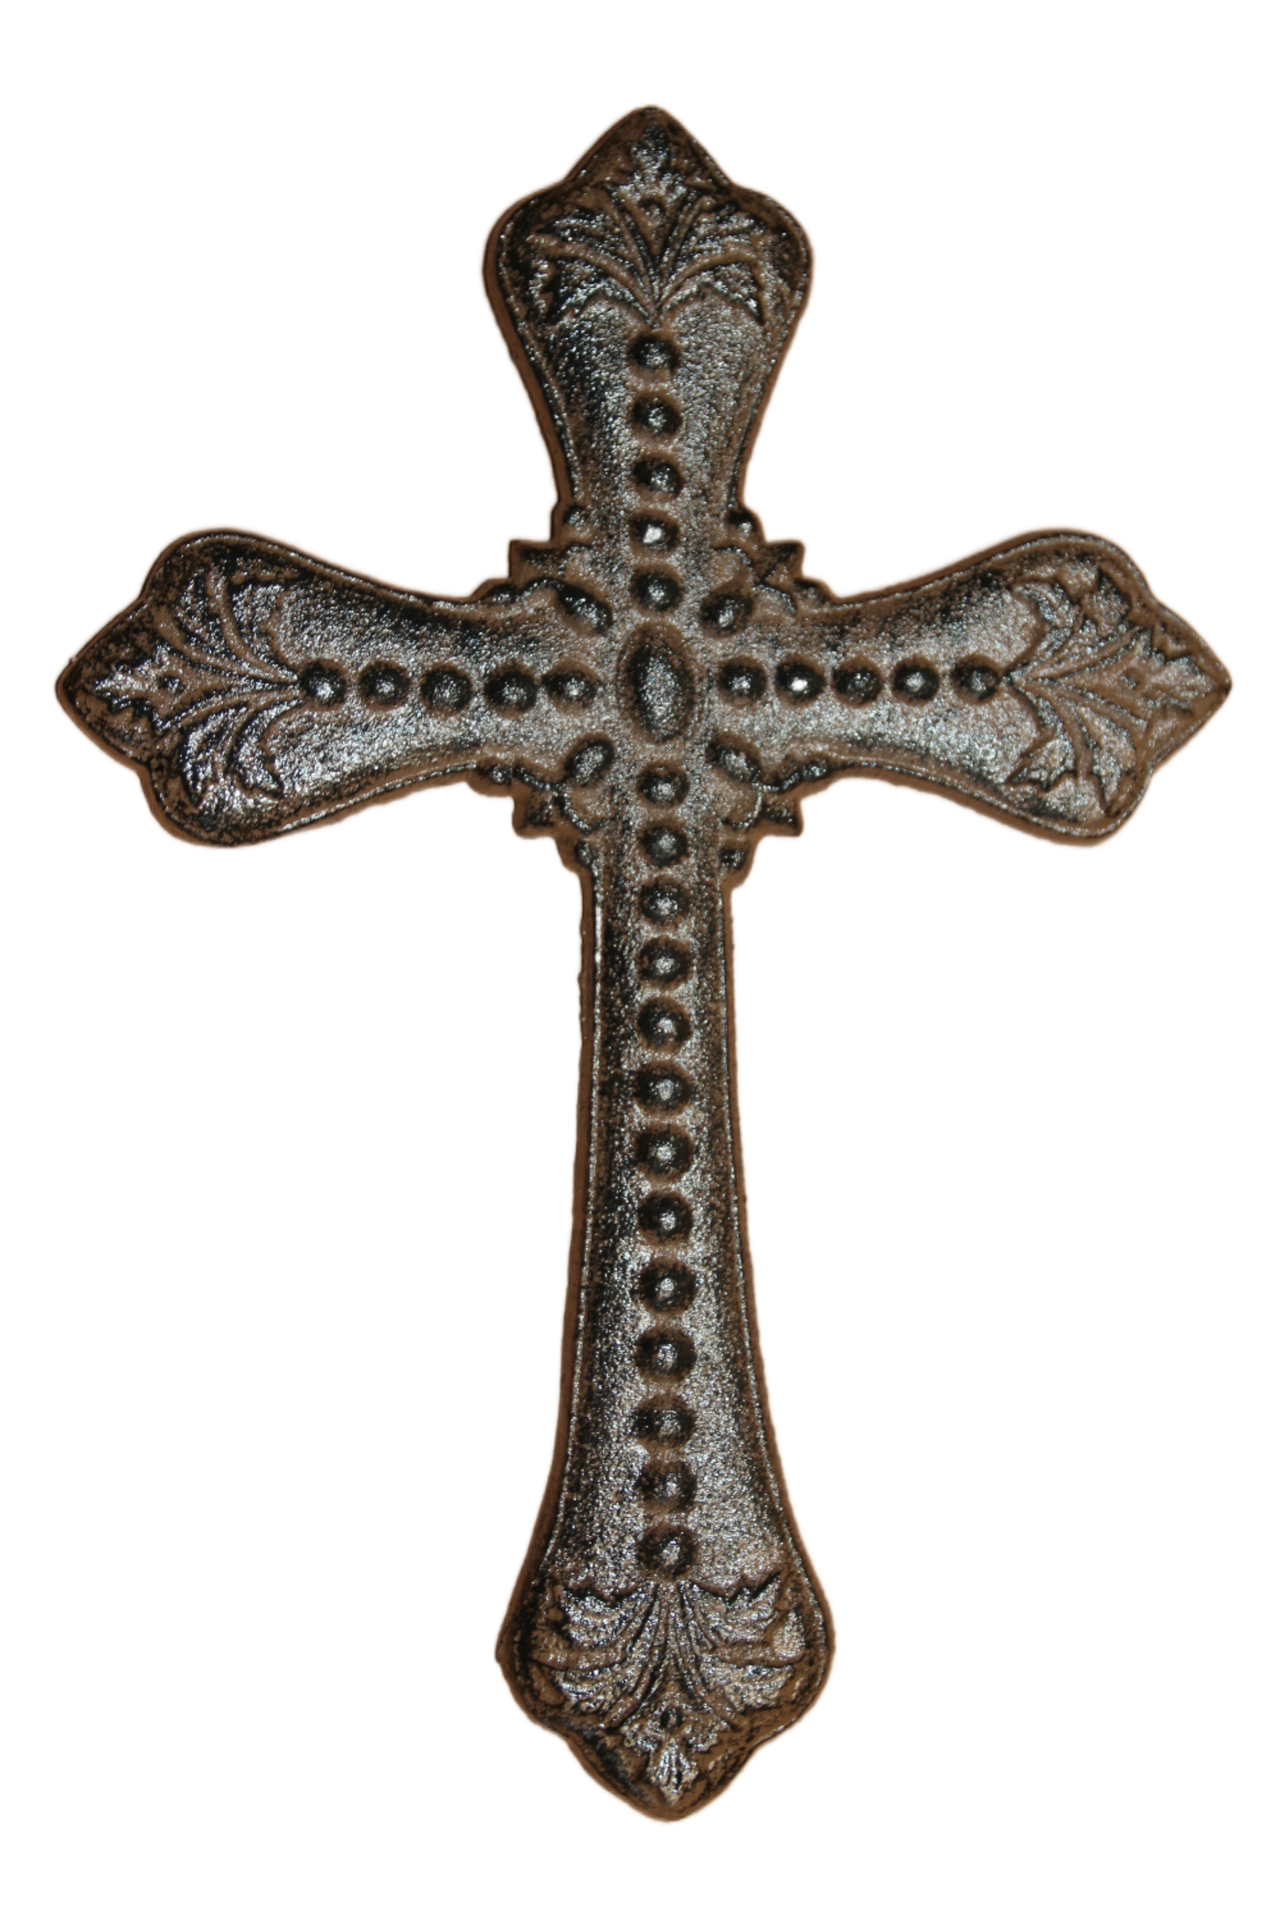 Cast Iron Cross Wall Hanging - Crucifix, religious, Christianity symbol. Great pastor's gift or house warming present. Ships Free! C-21